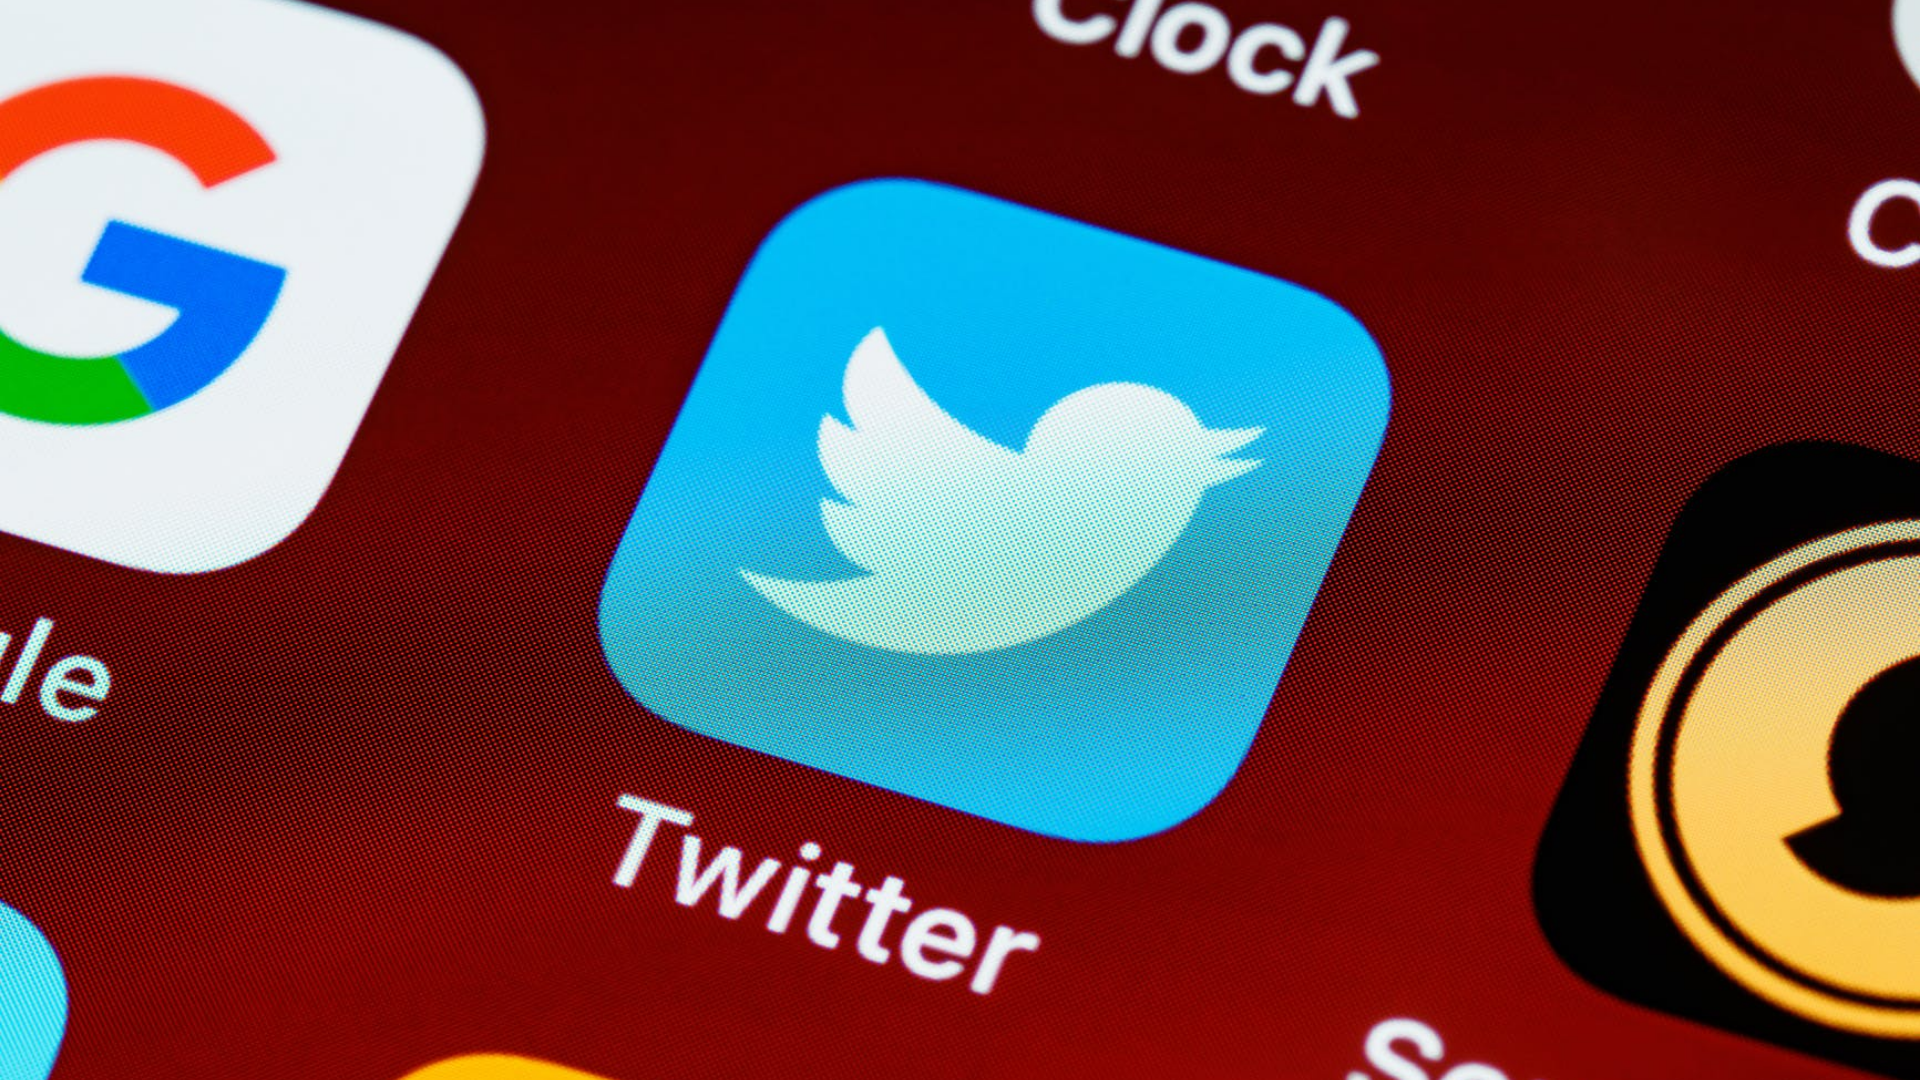 Twitter acqui-hires creative agency Ueno to help design new products